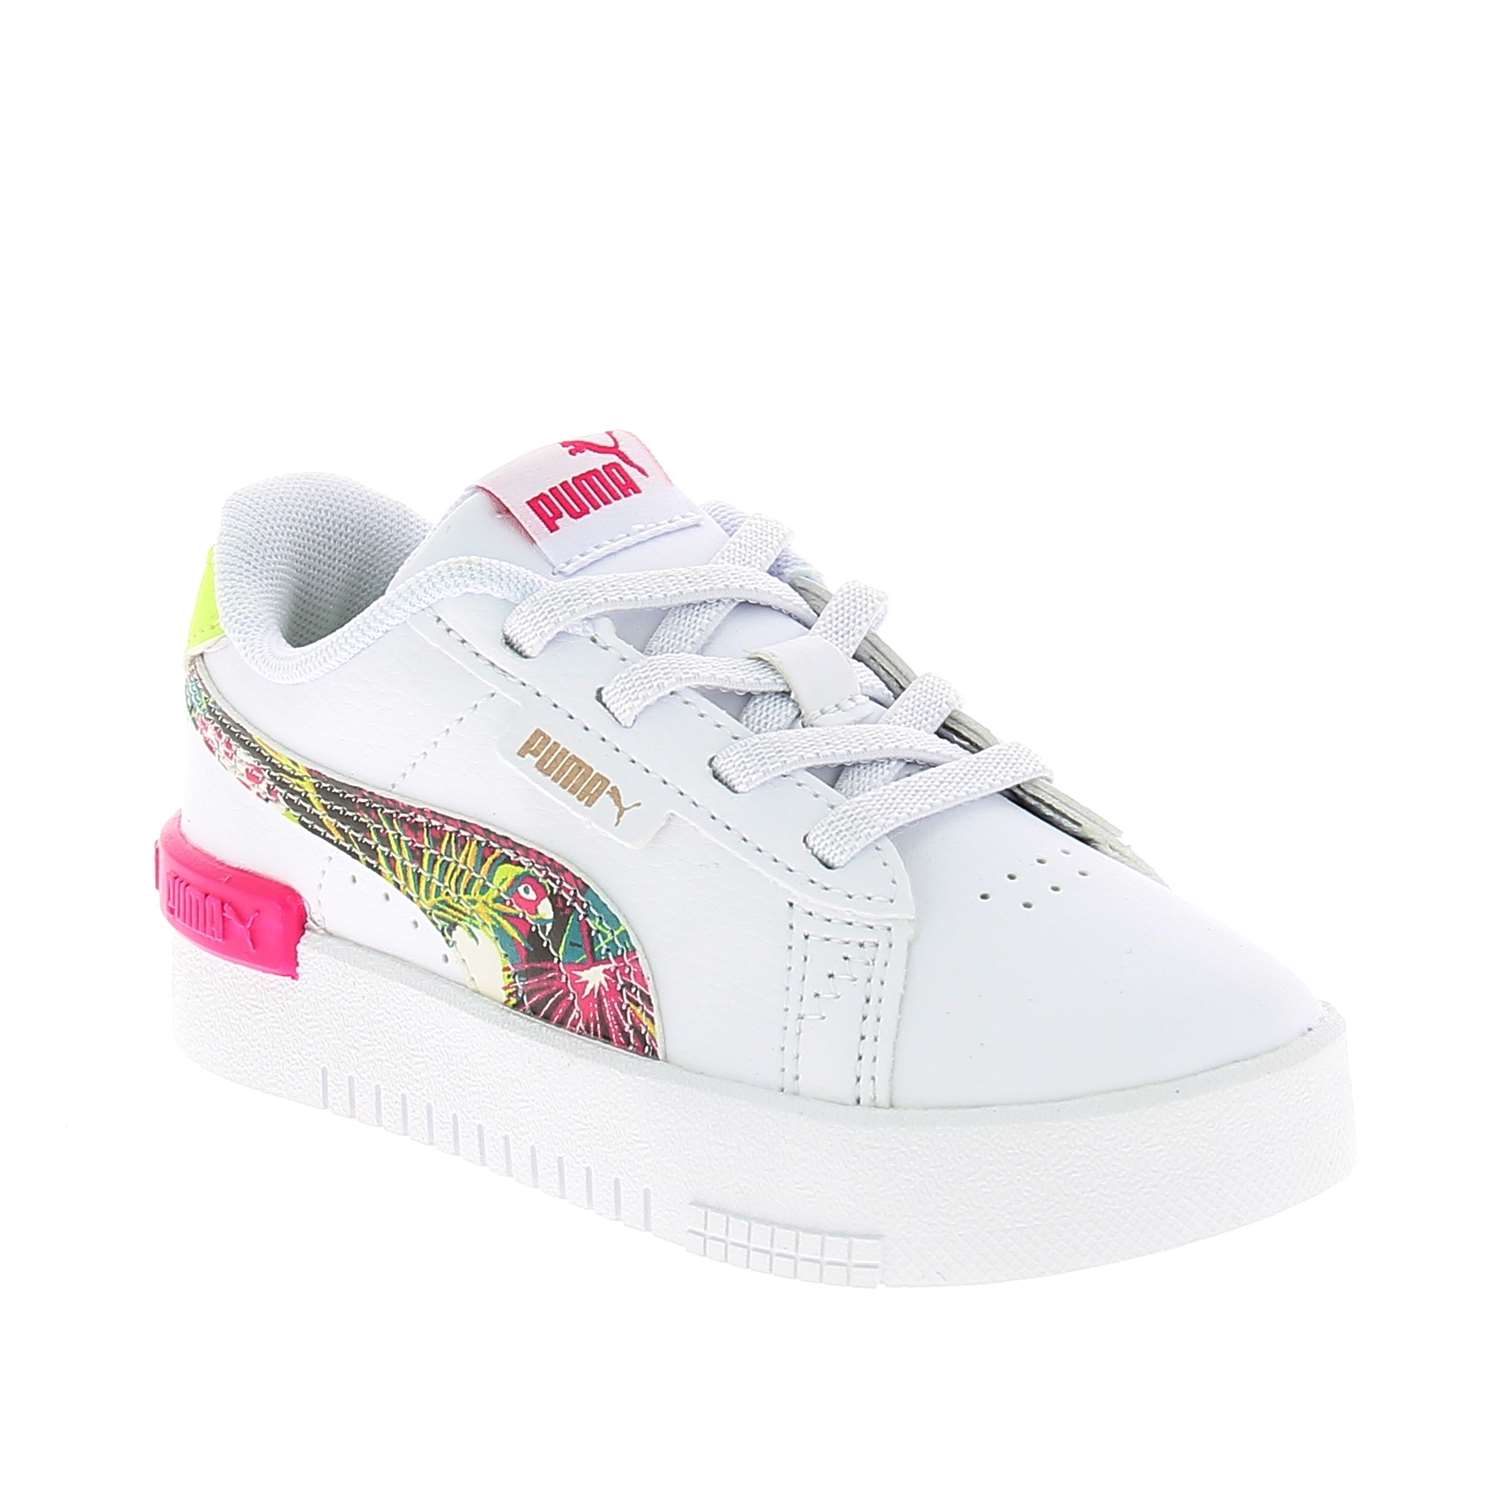 01 - JADA VACAY QUEEN AC INF - PUMA - Chaussures à lacets - Synthétique